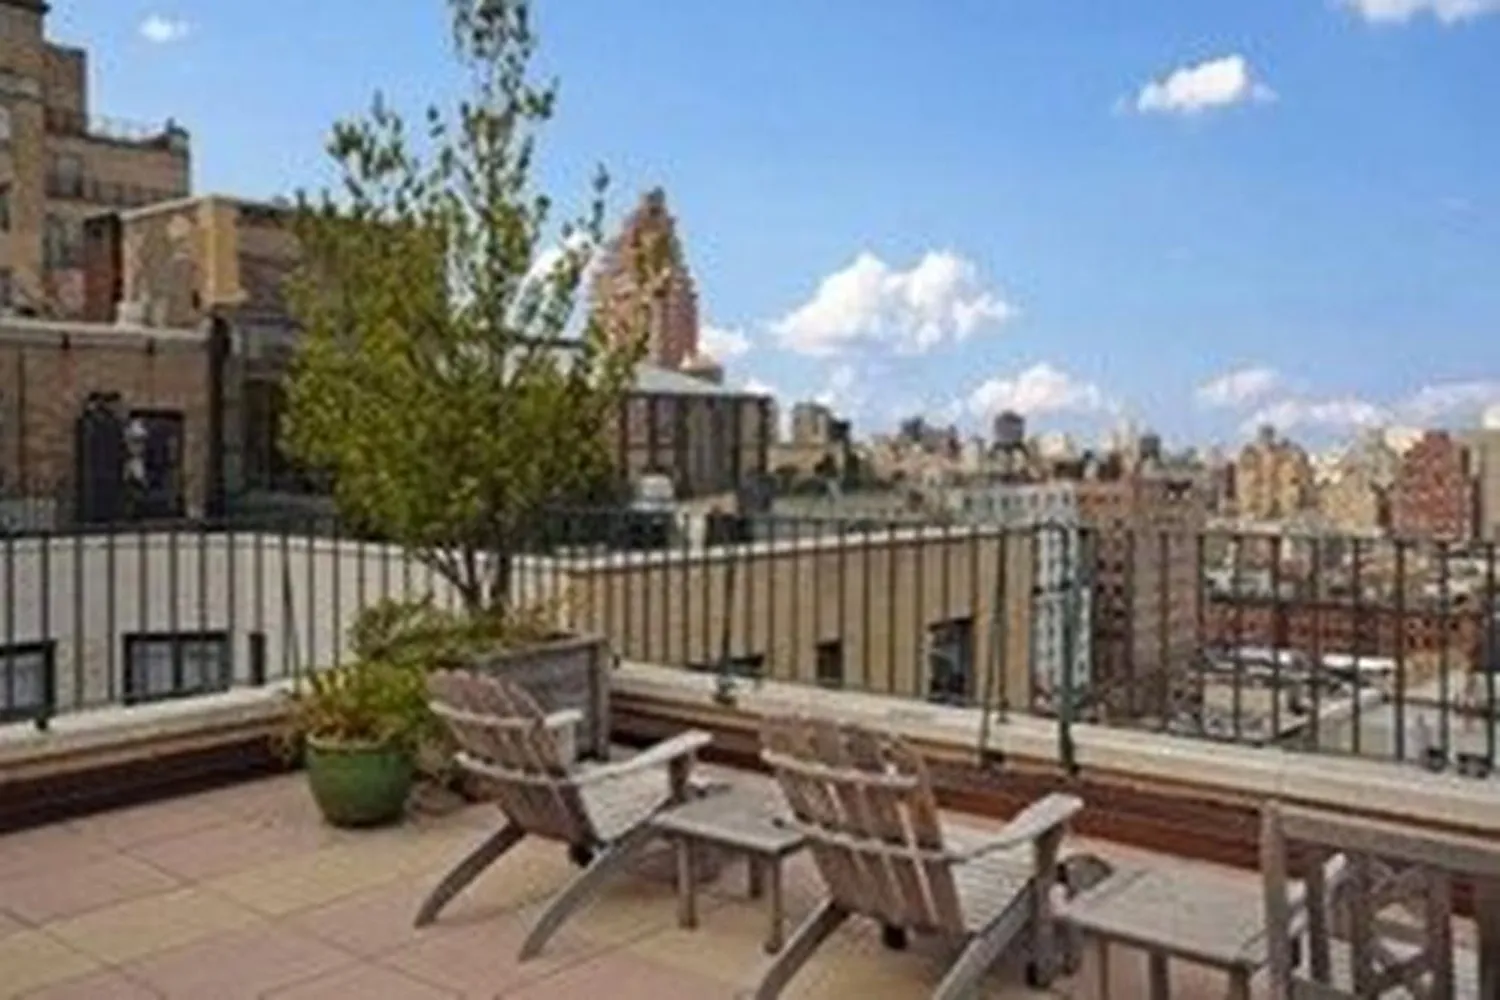 Beautifully planted and furnished roof deck.